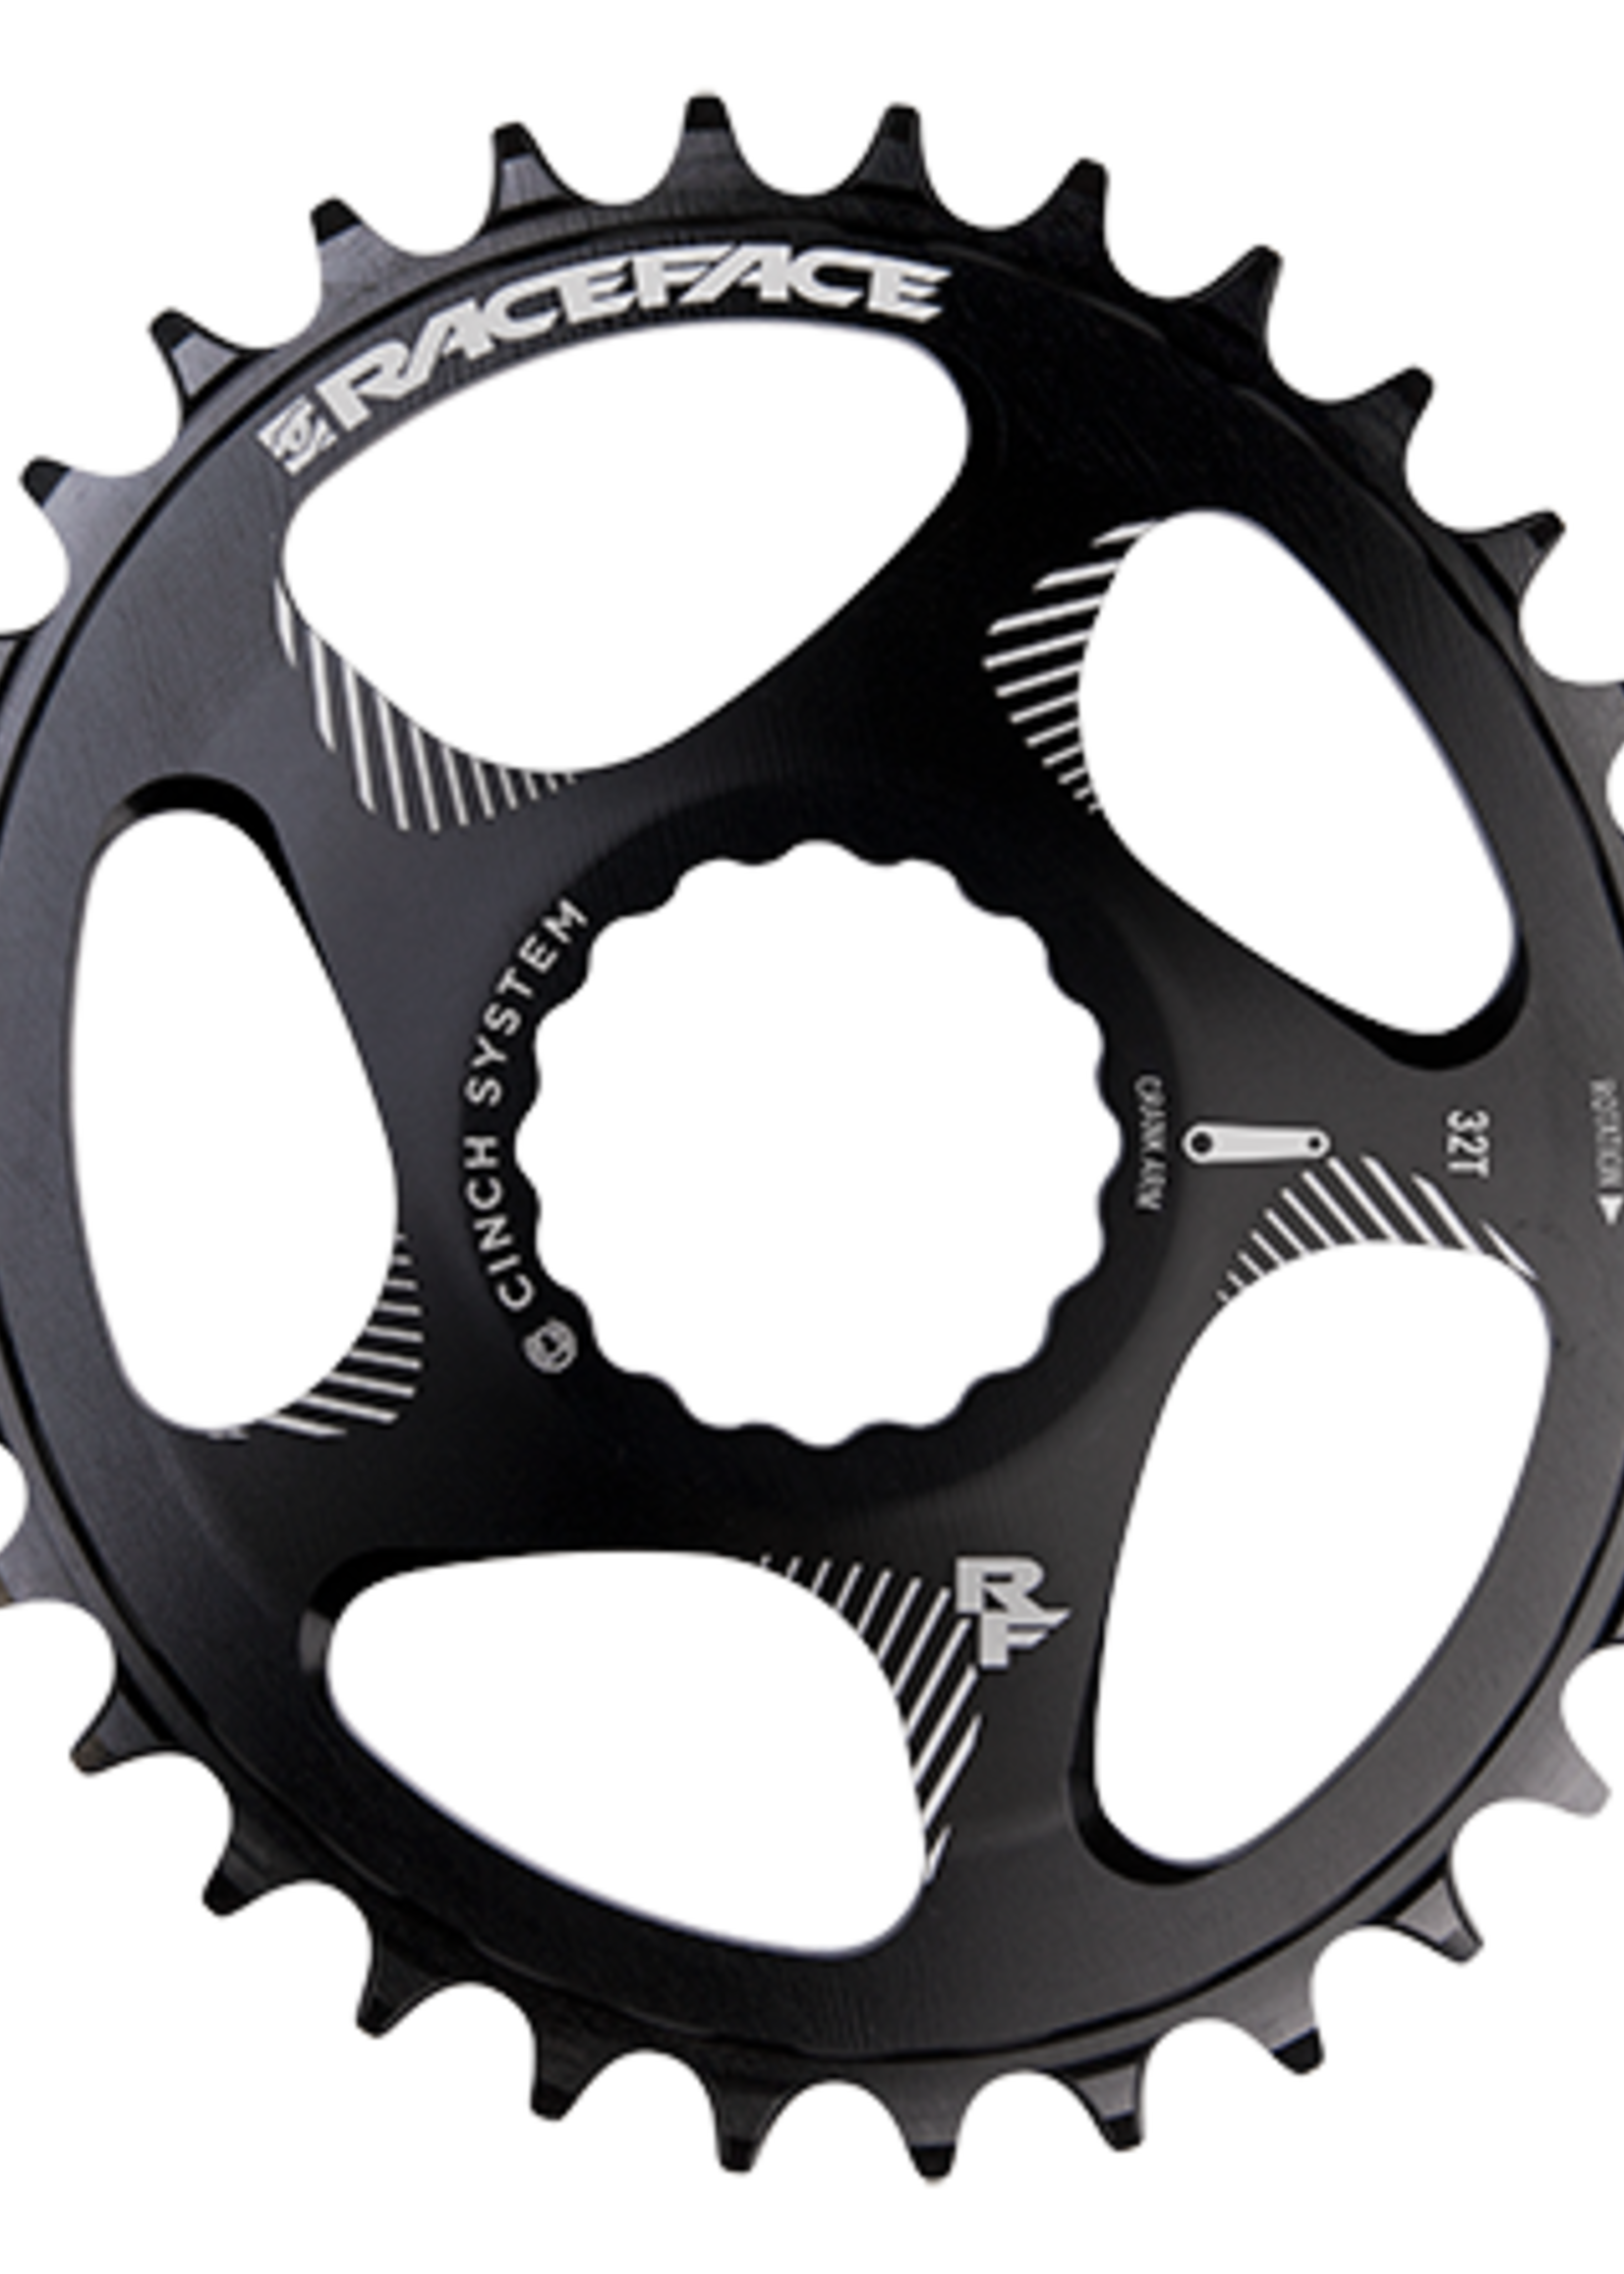 RACEFACE Raceface Chainring 1x NW Direct Cinch Oval